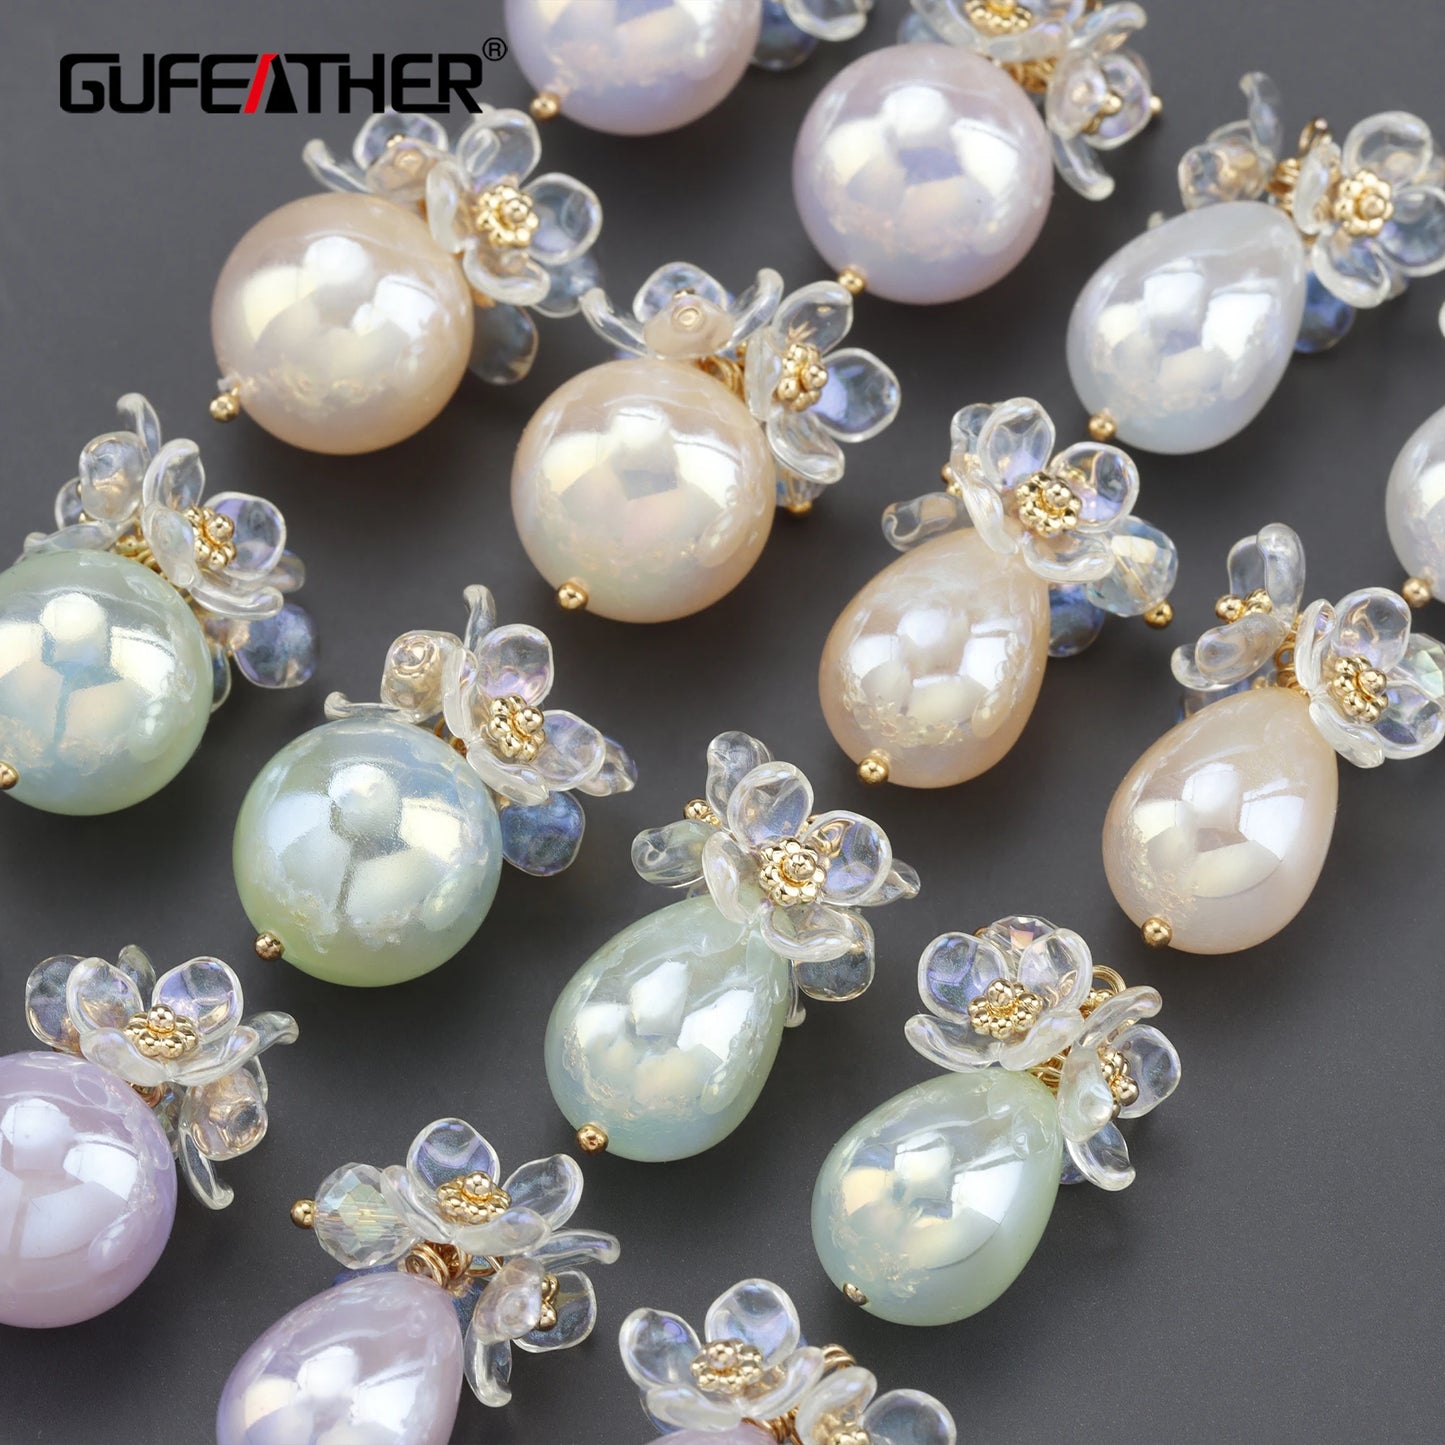 GUFEATHER MA41,hand made,18k gold plated,candy-colored crystal ball,flower earrings,korean design,diy,jewelry making,6pcs/lot